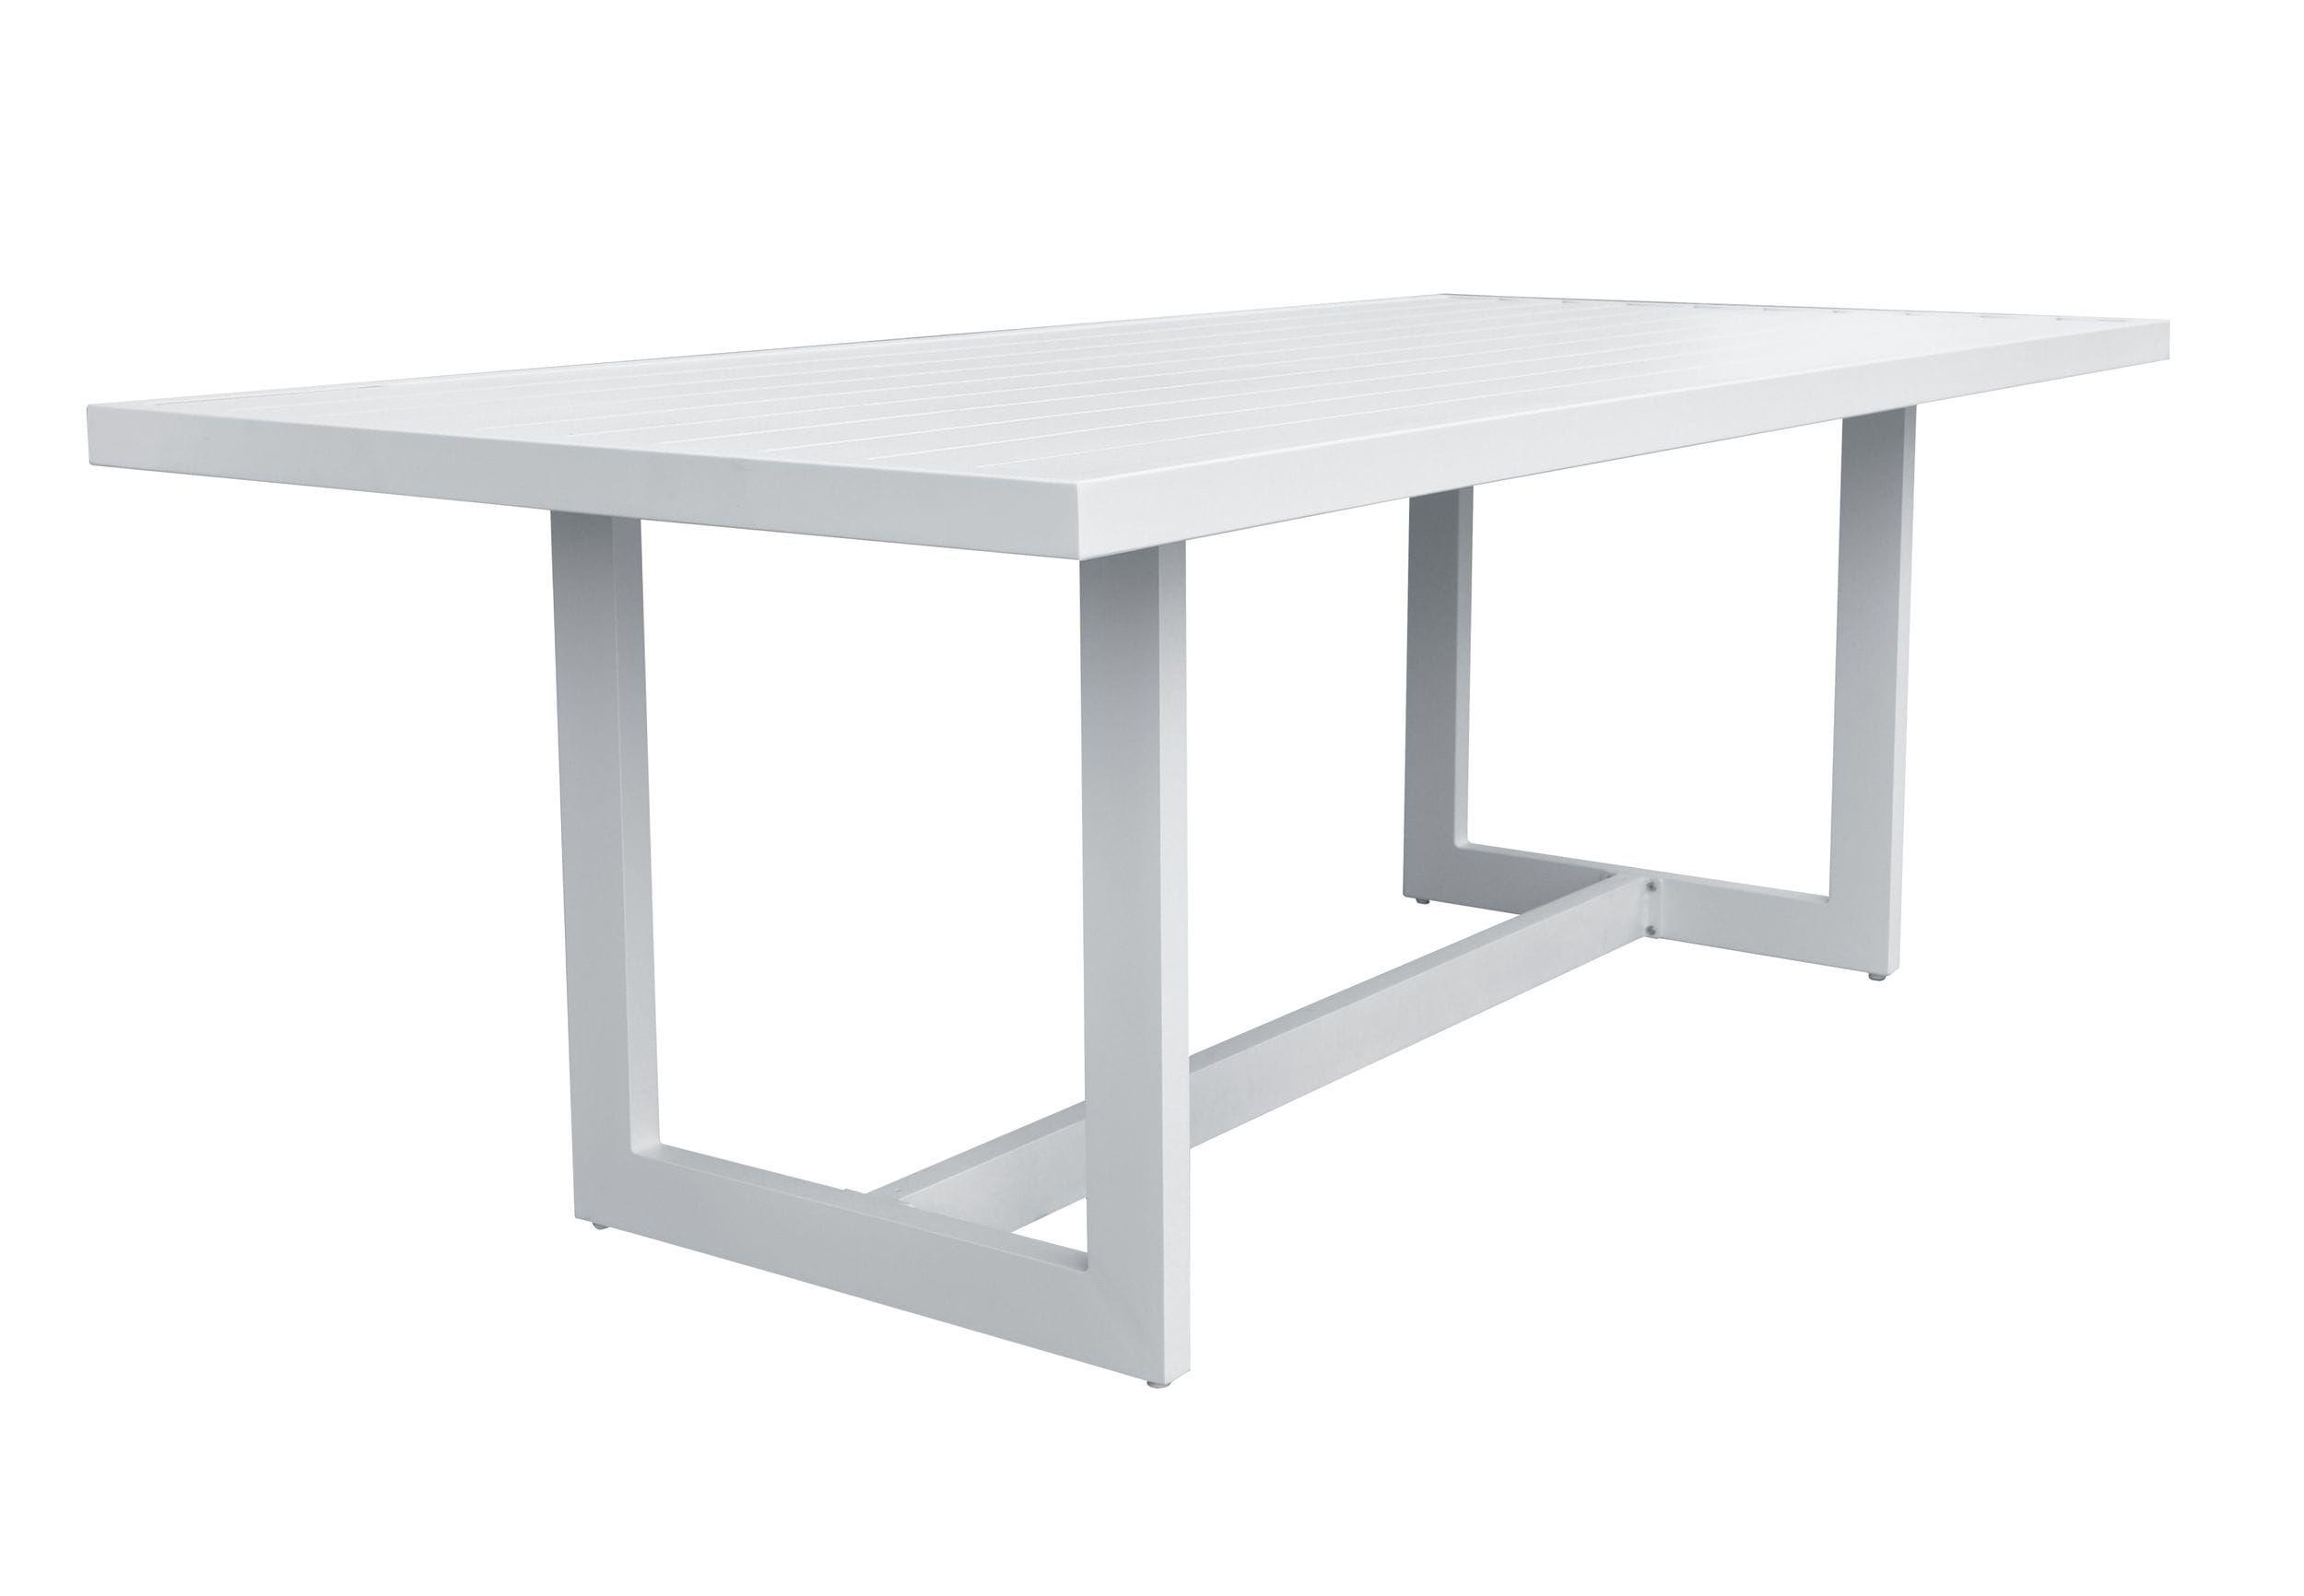 Modern Outdoor Dining Table Renava Wake Outdoor Dining Table VGGEMONTALK-CH-WHT-1 VGGEMONTALK-CH-WHT-1 in Off-White, White 